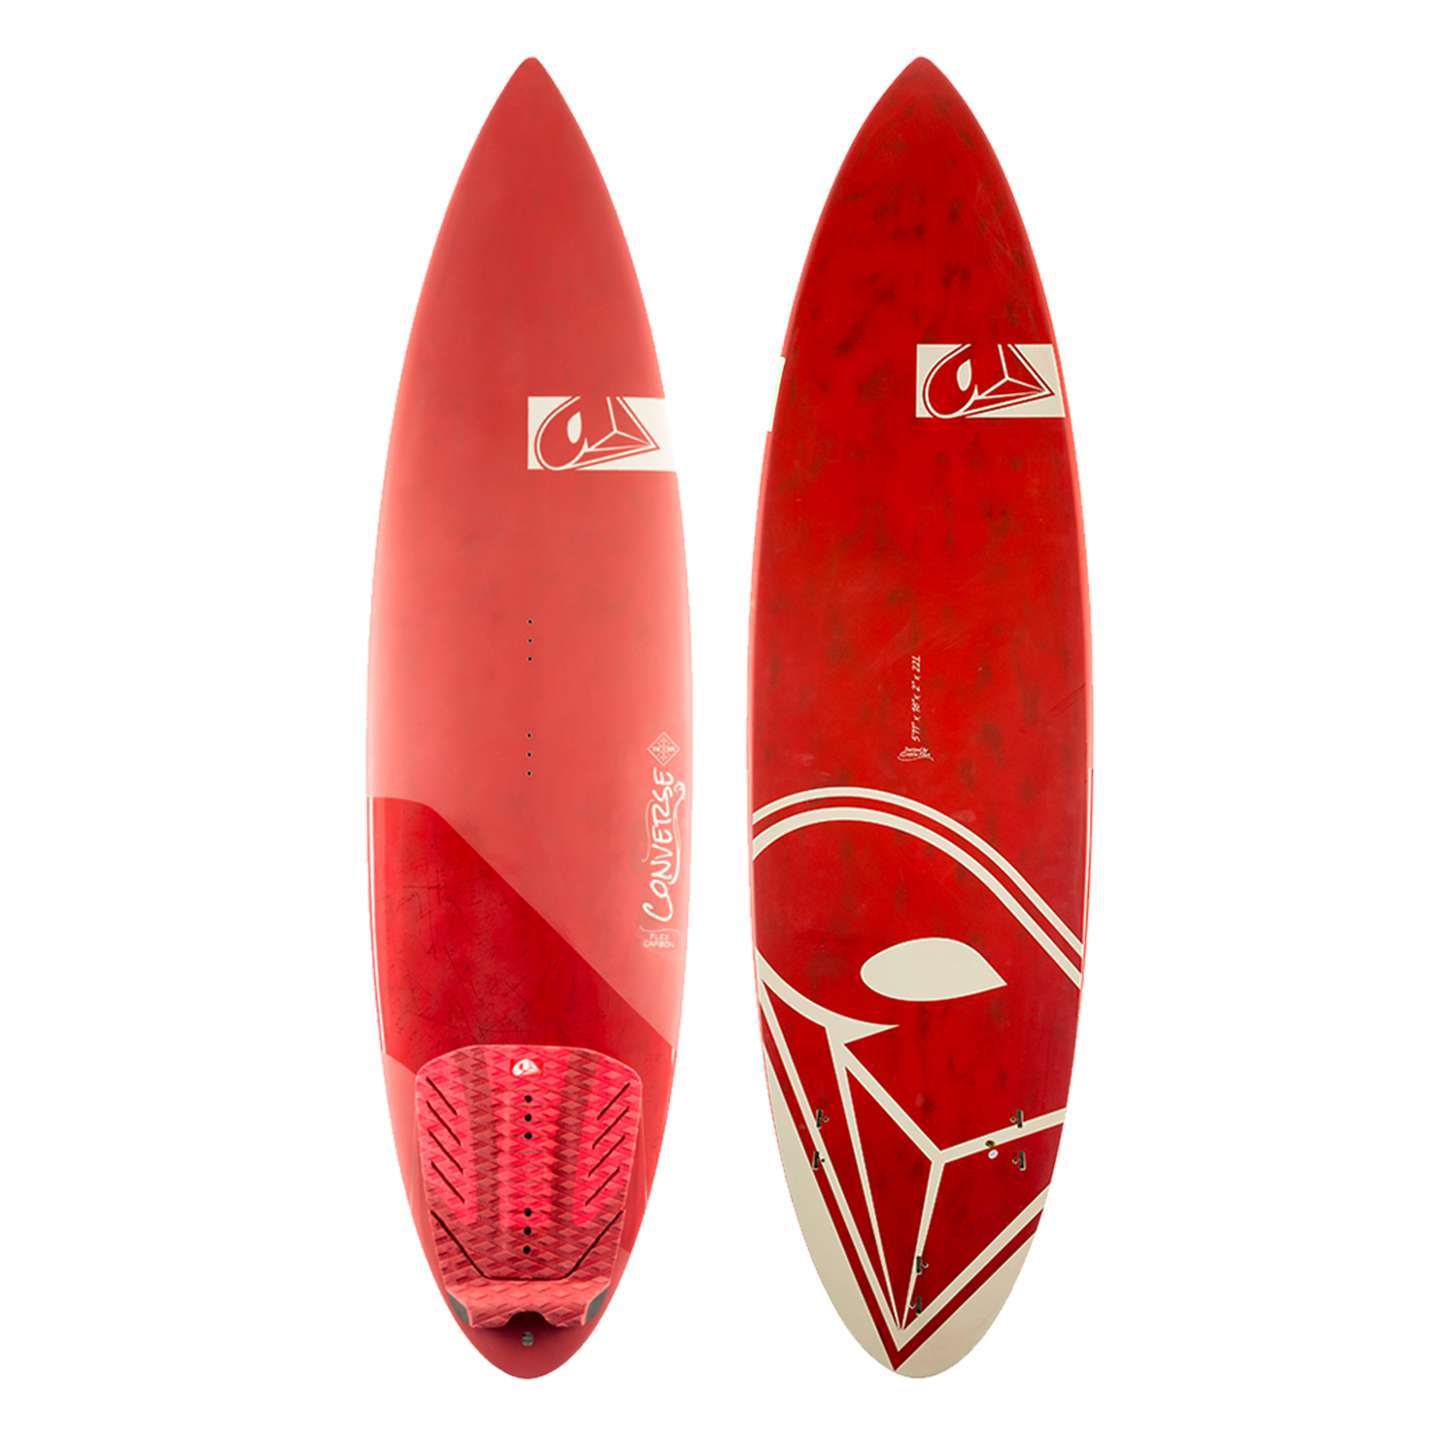 Airush Converse 2016 Kite Surfboard of Watersports